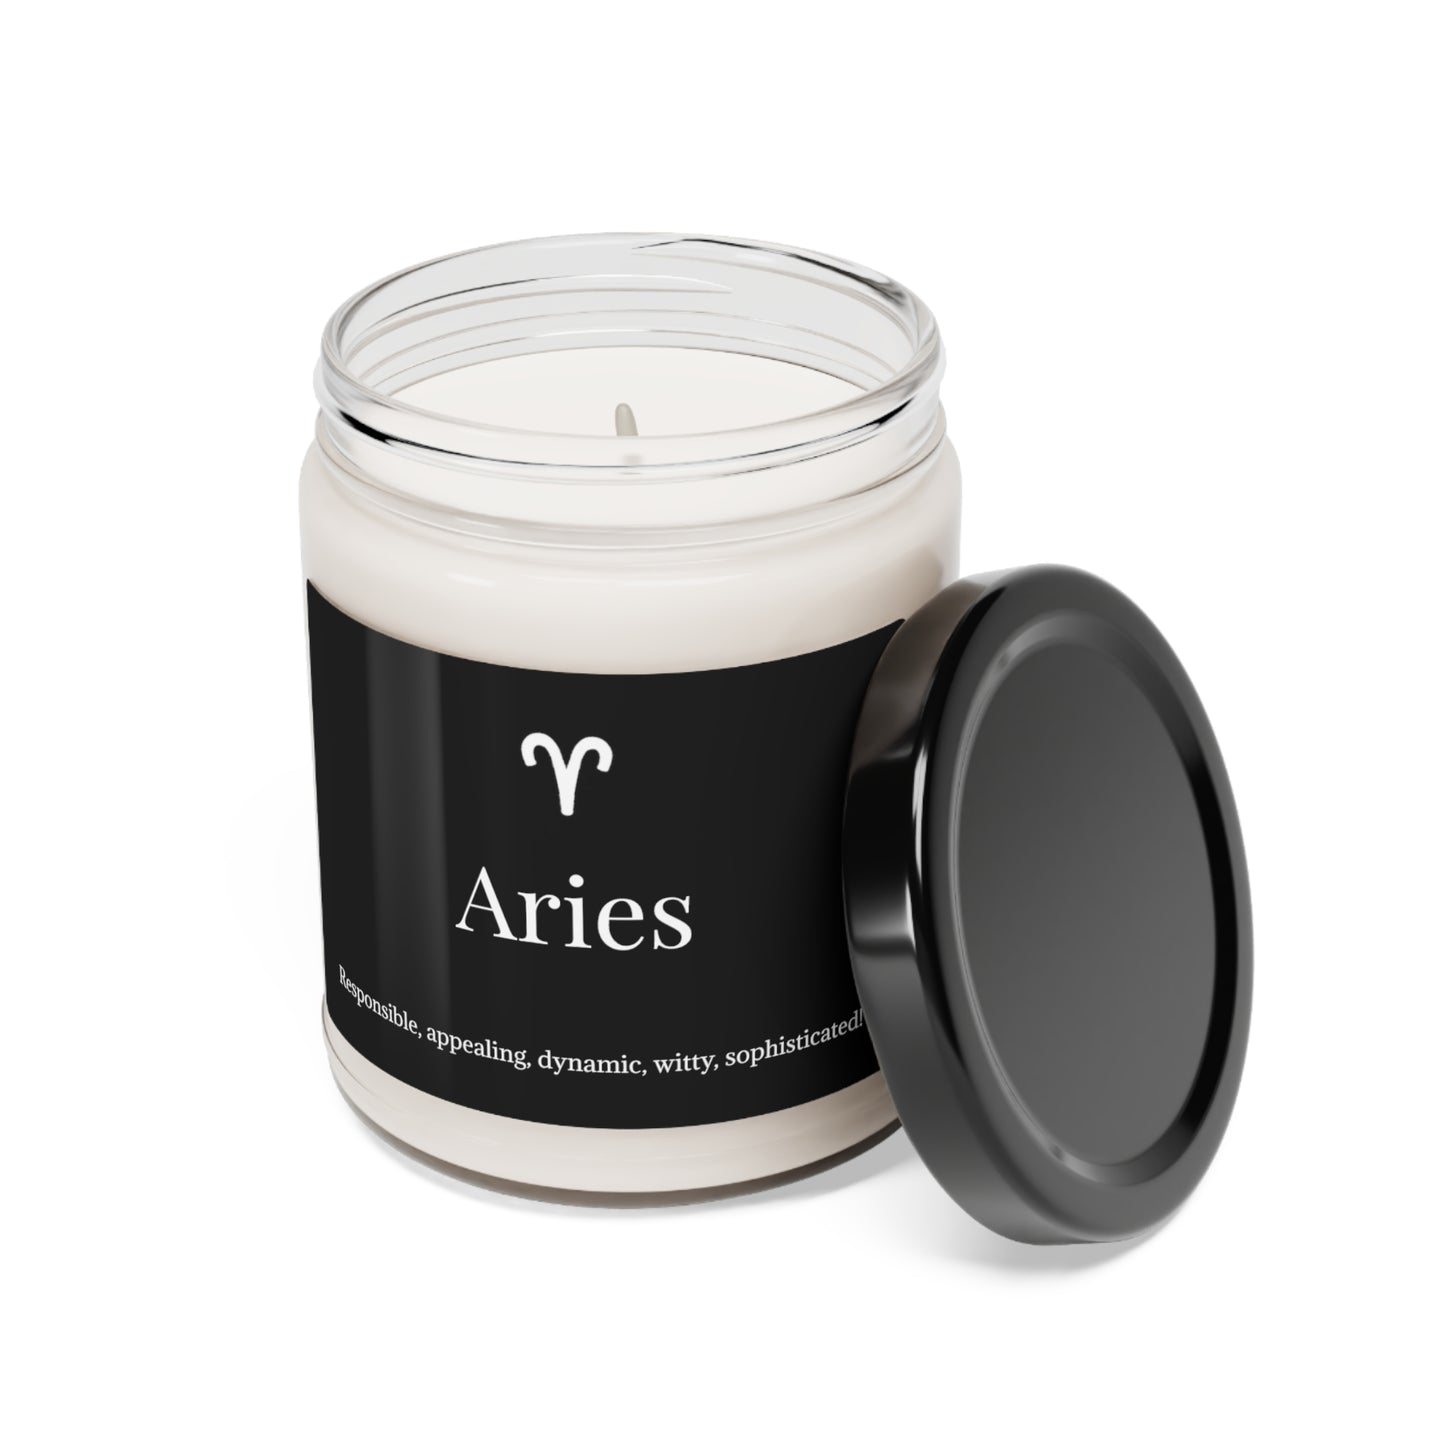 Aries Scented Soy Candle